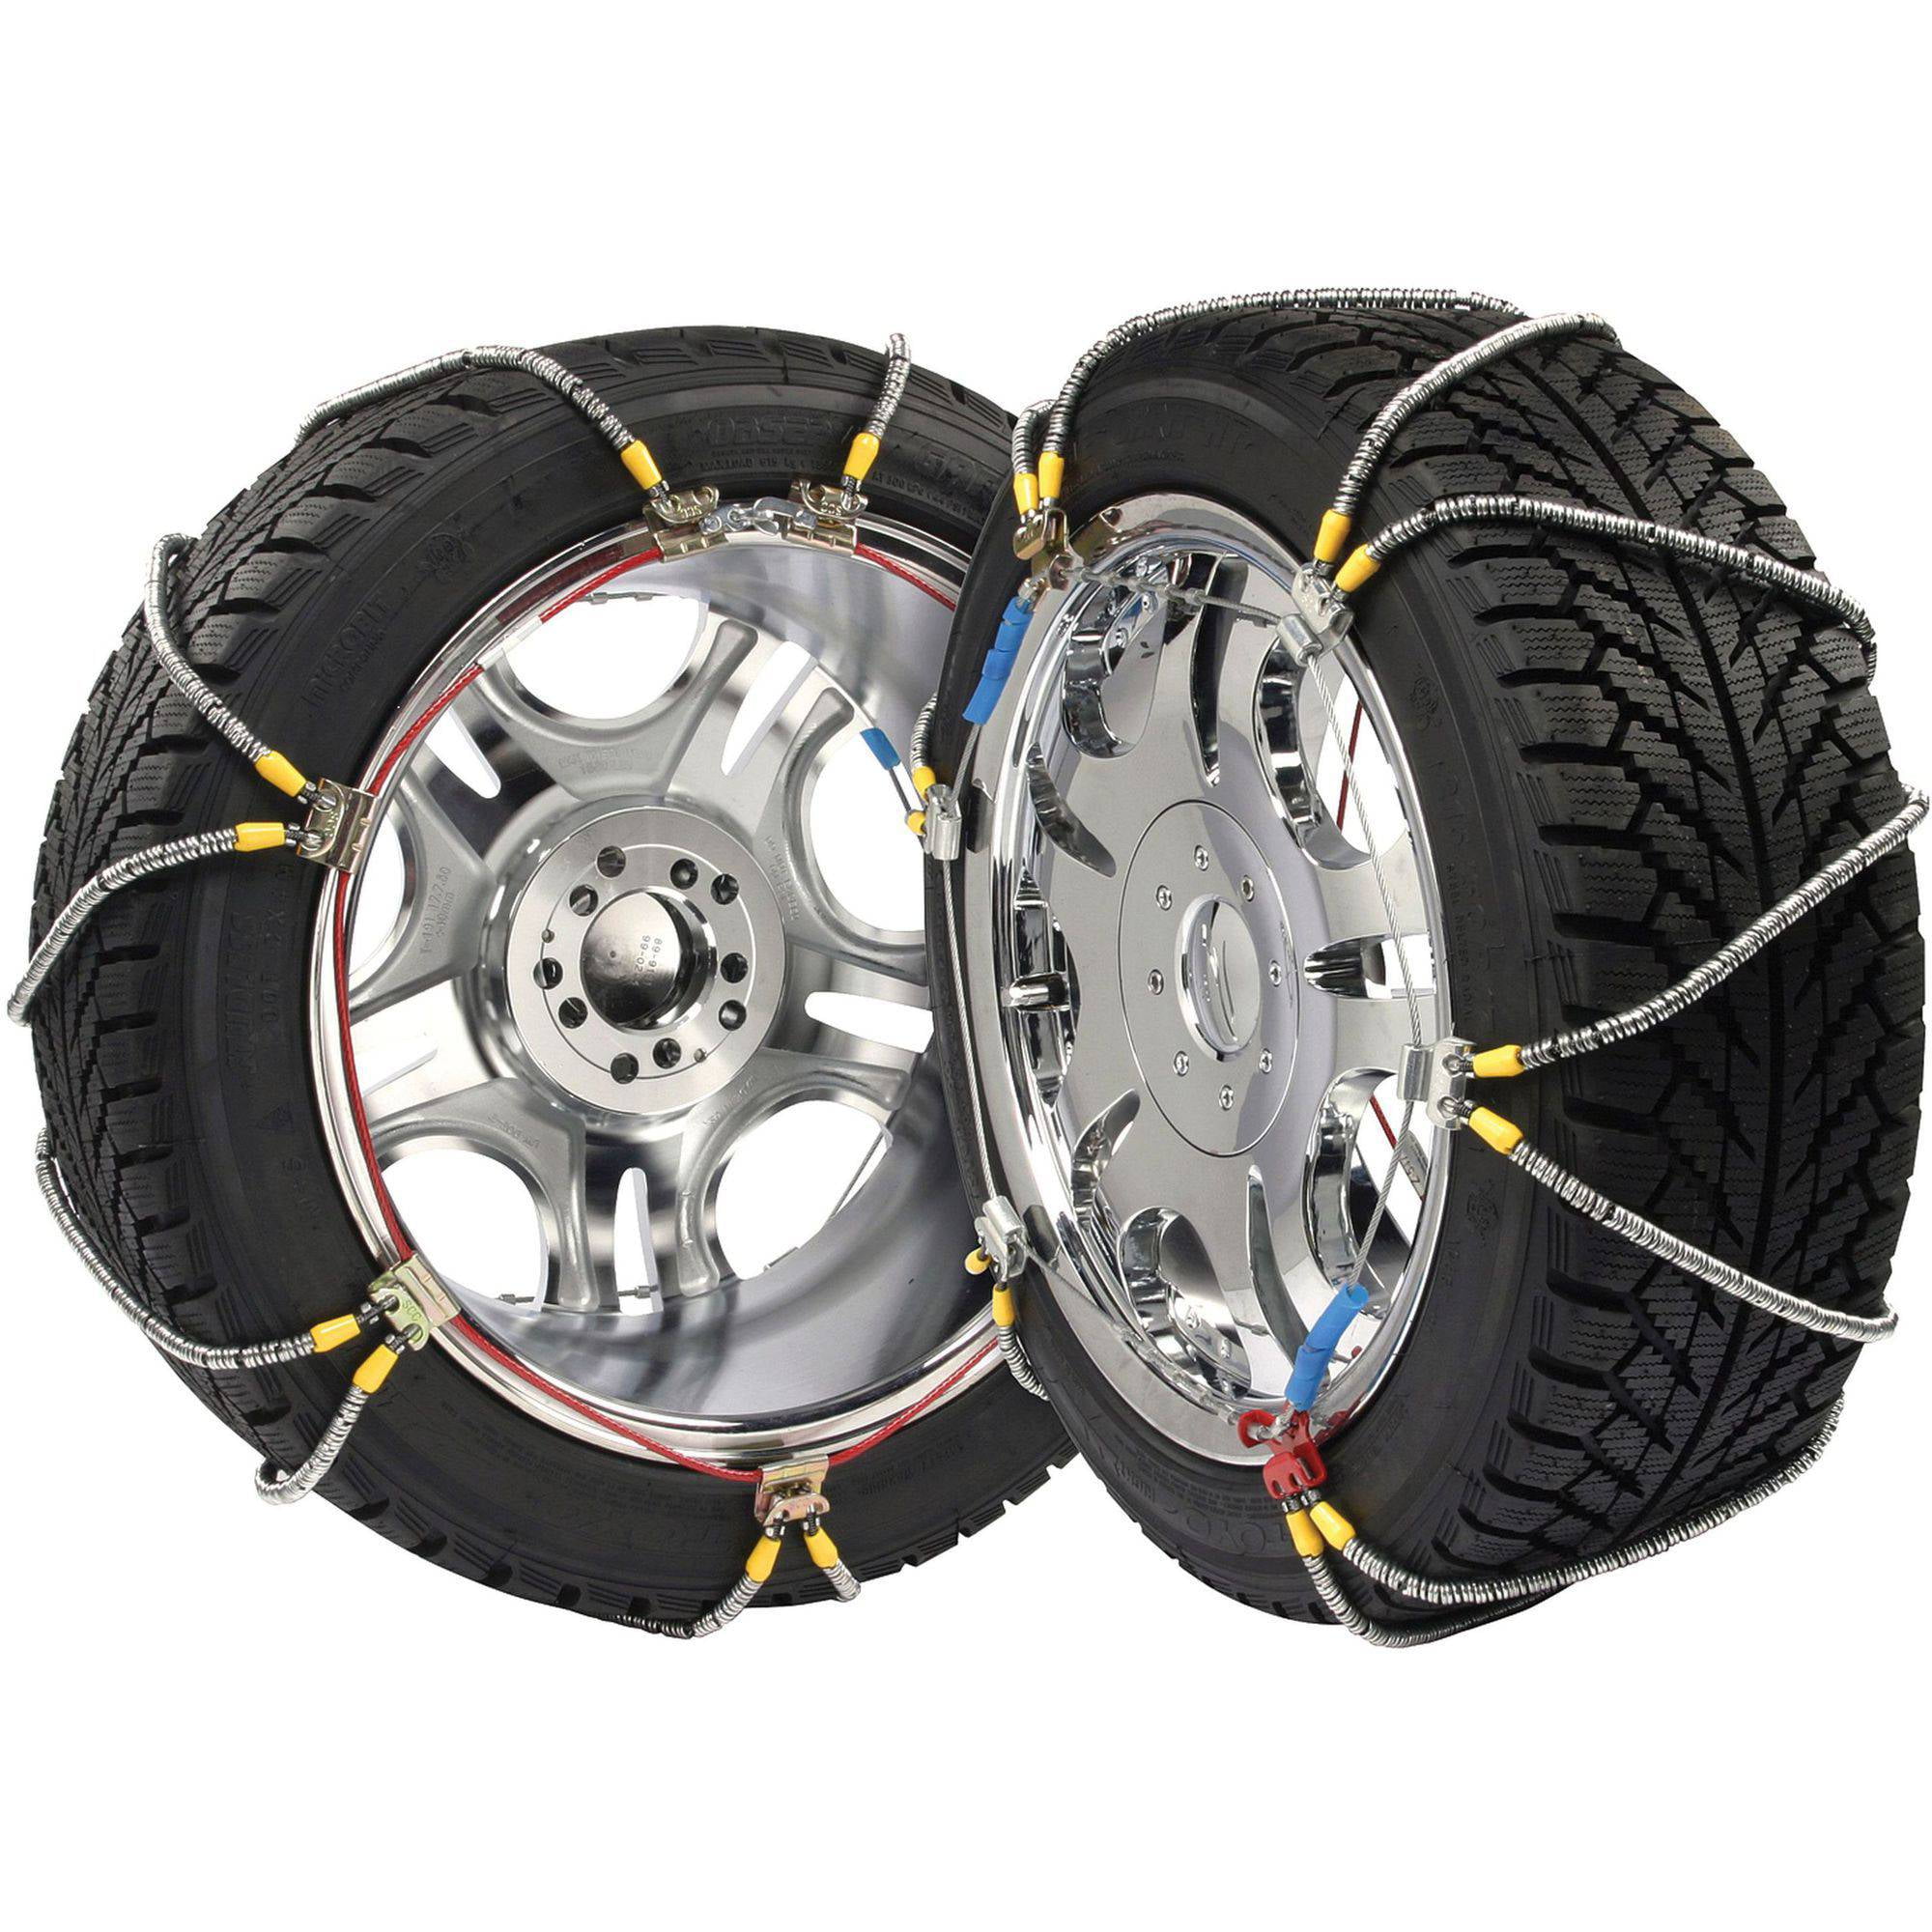 Security Chain Company Z-563 Z-Chain Extreme Performance Cable Tire Traction Chain Set of 2 